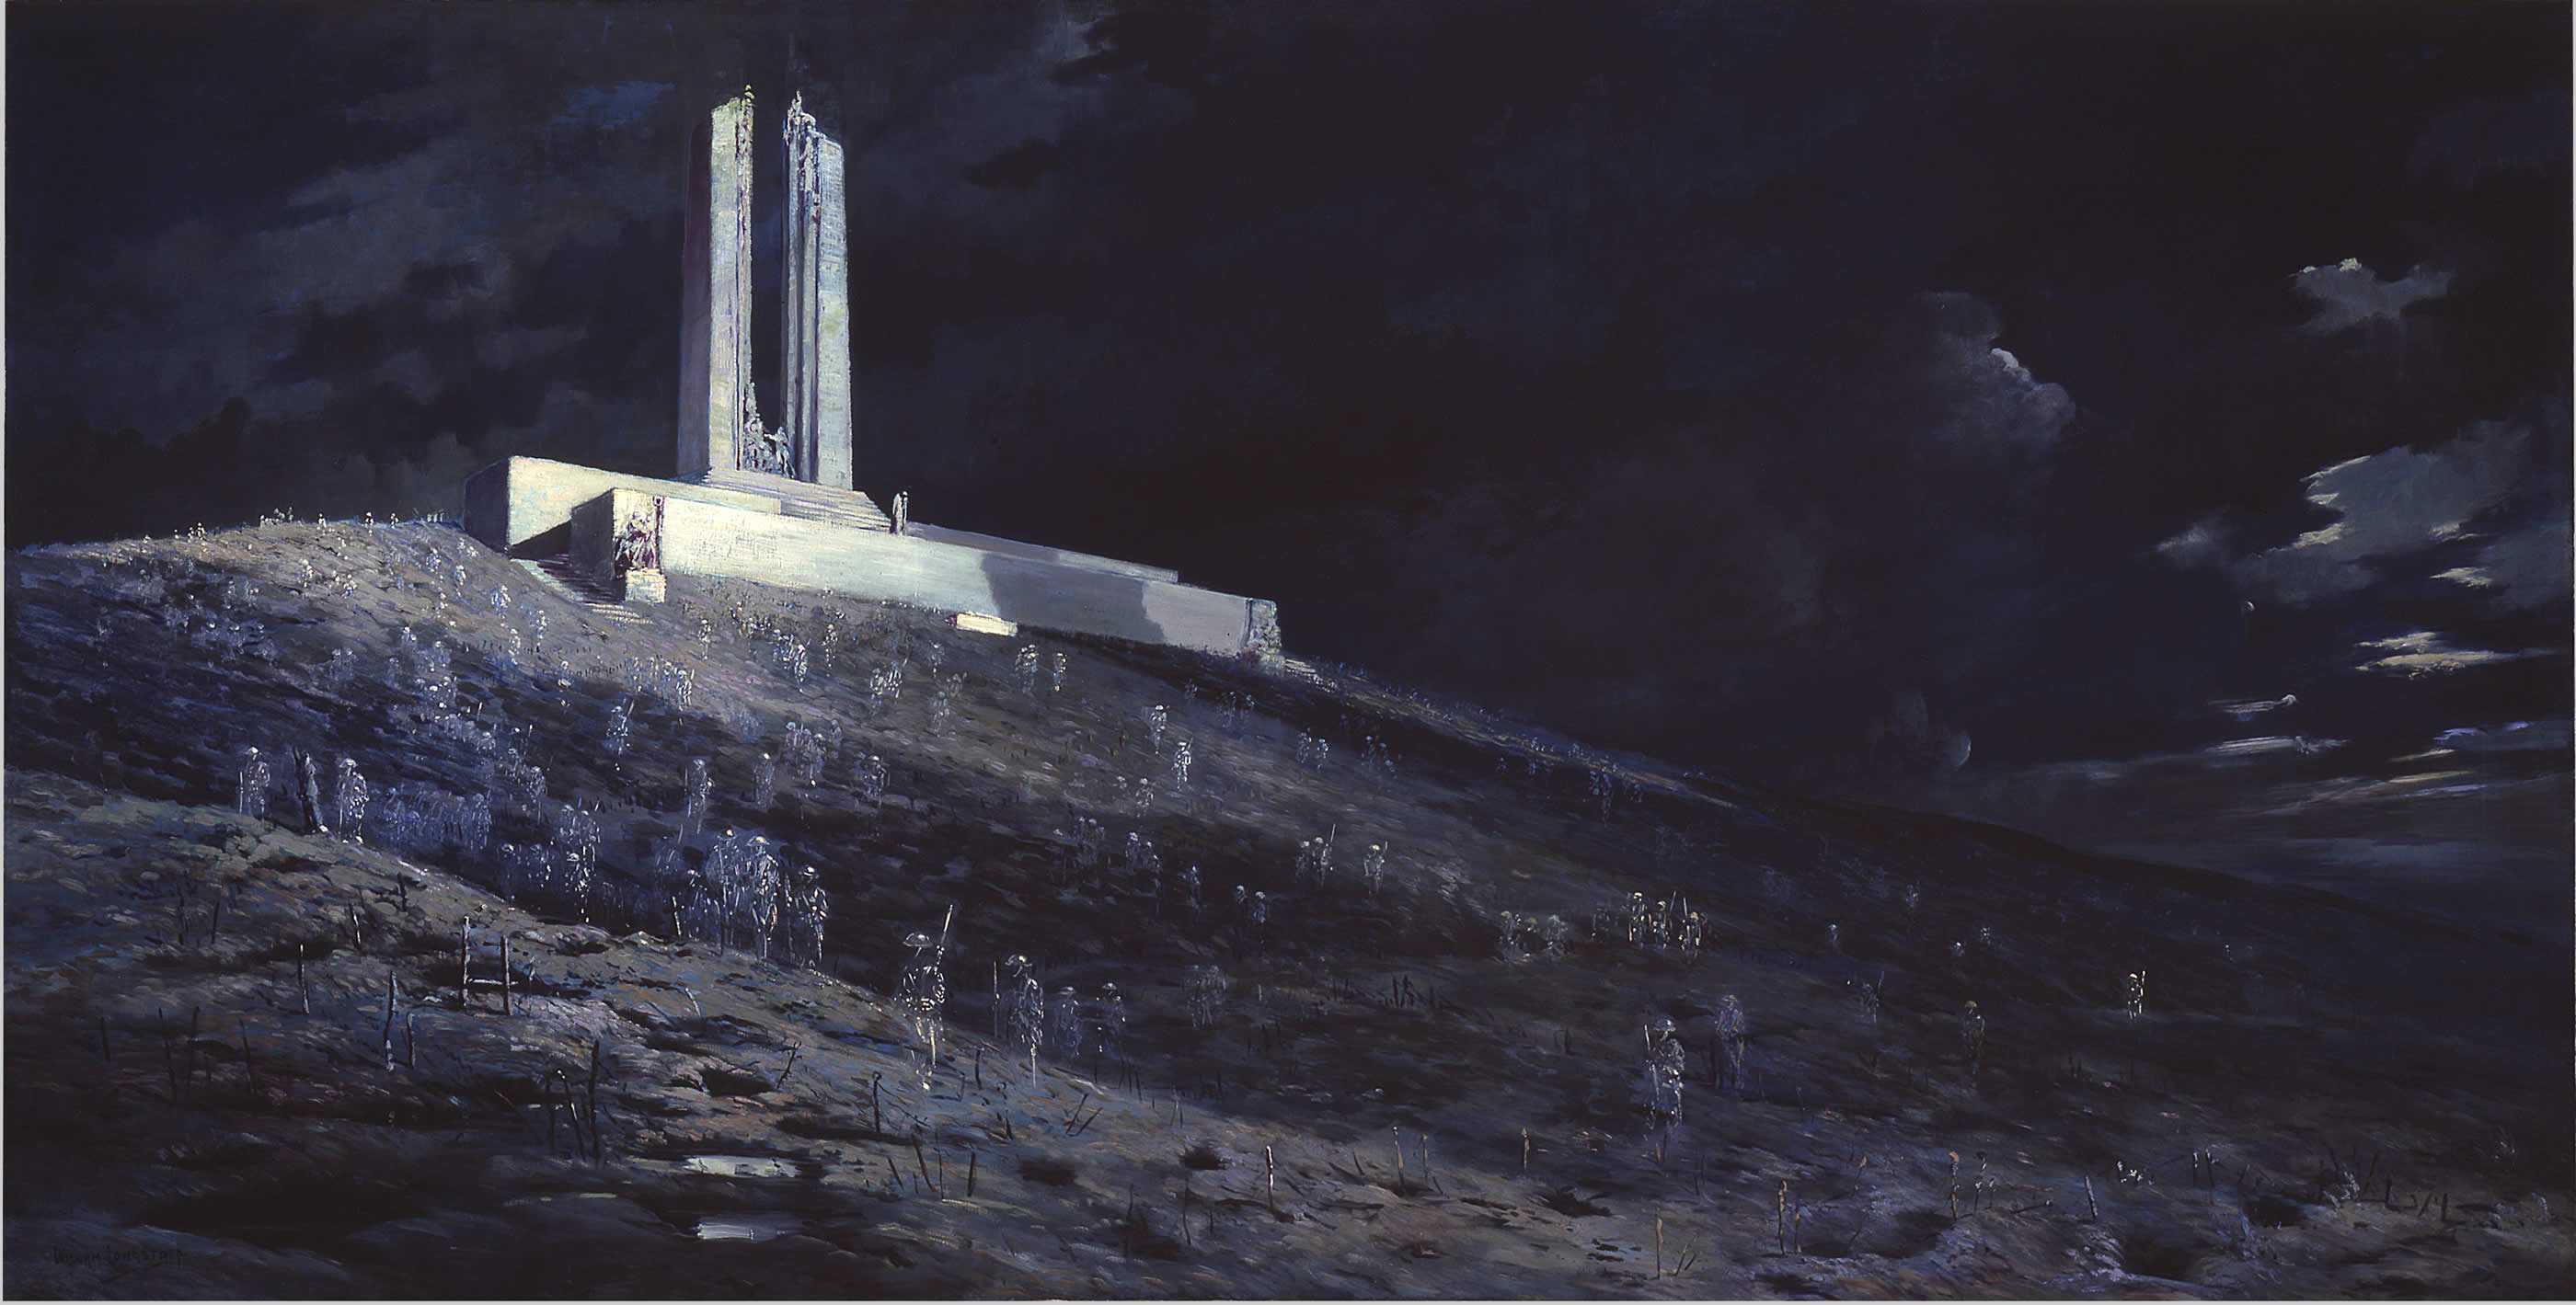 The painting is dark, the focal point through light and positioning is the bright, white Vimy monument pillars at the top of the hill. Below, ghostly images of soldiers roam the land surrounding the monument.